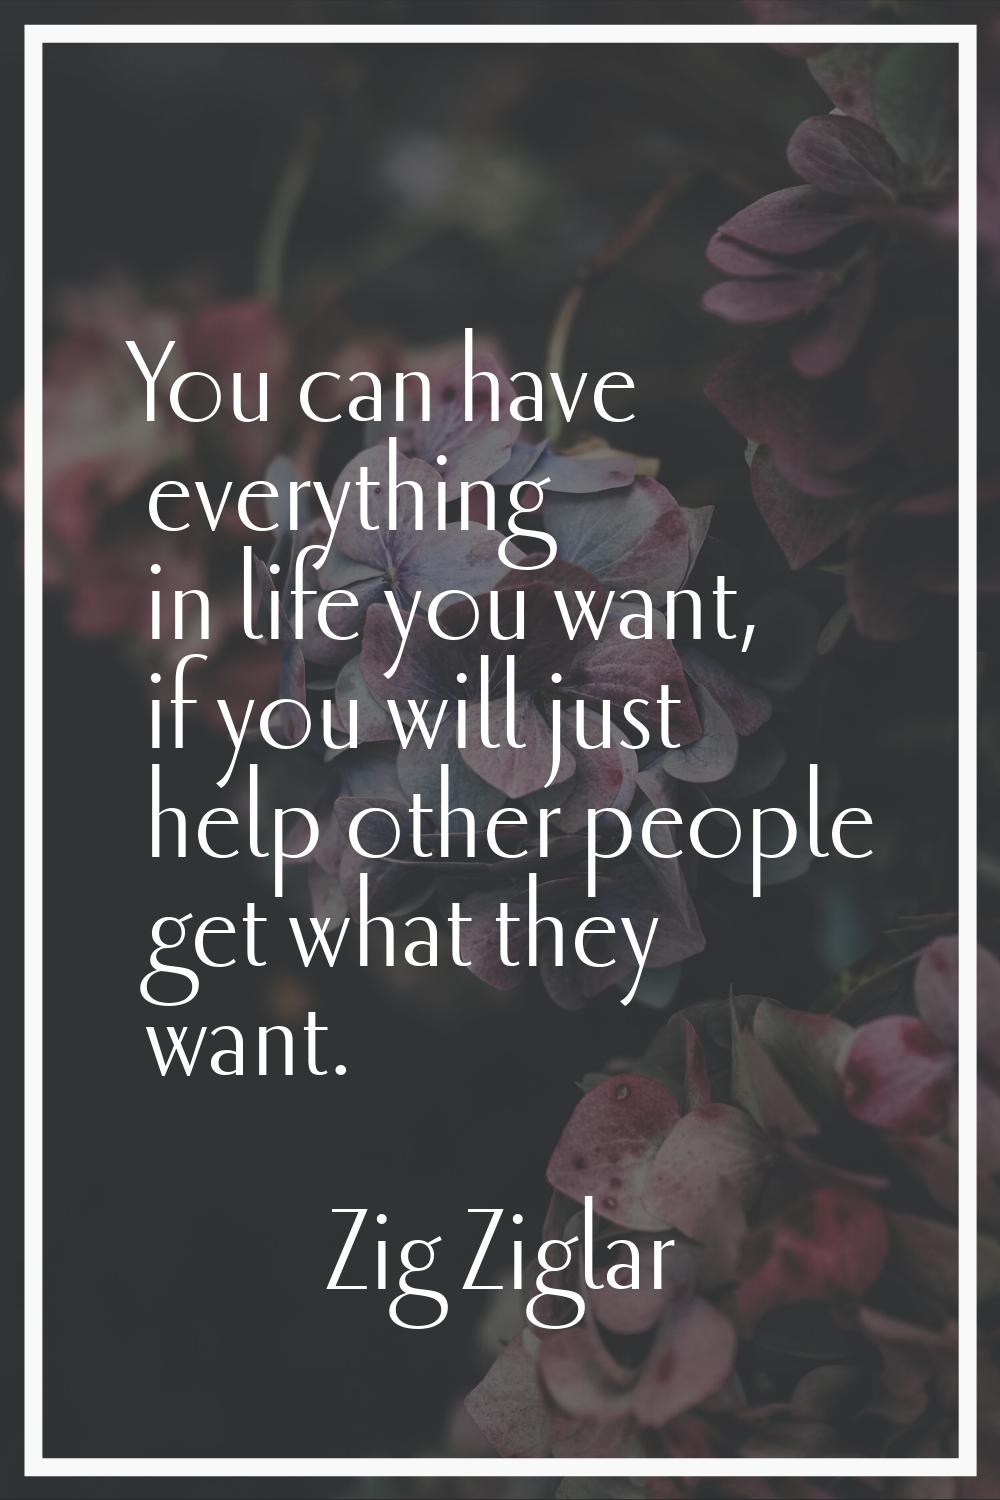 You can have everything in life you want, if you will just help other people get what they want.